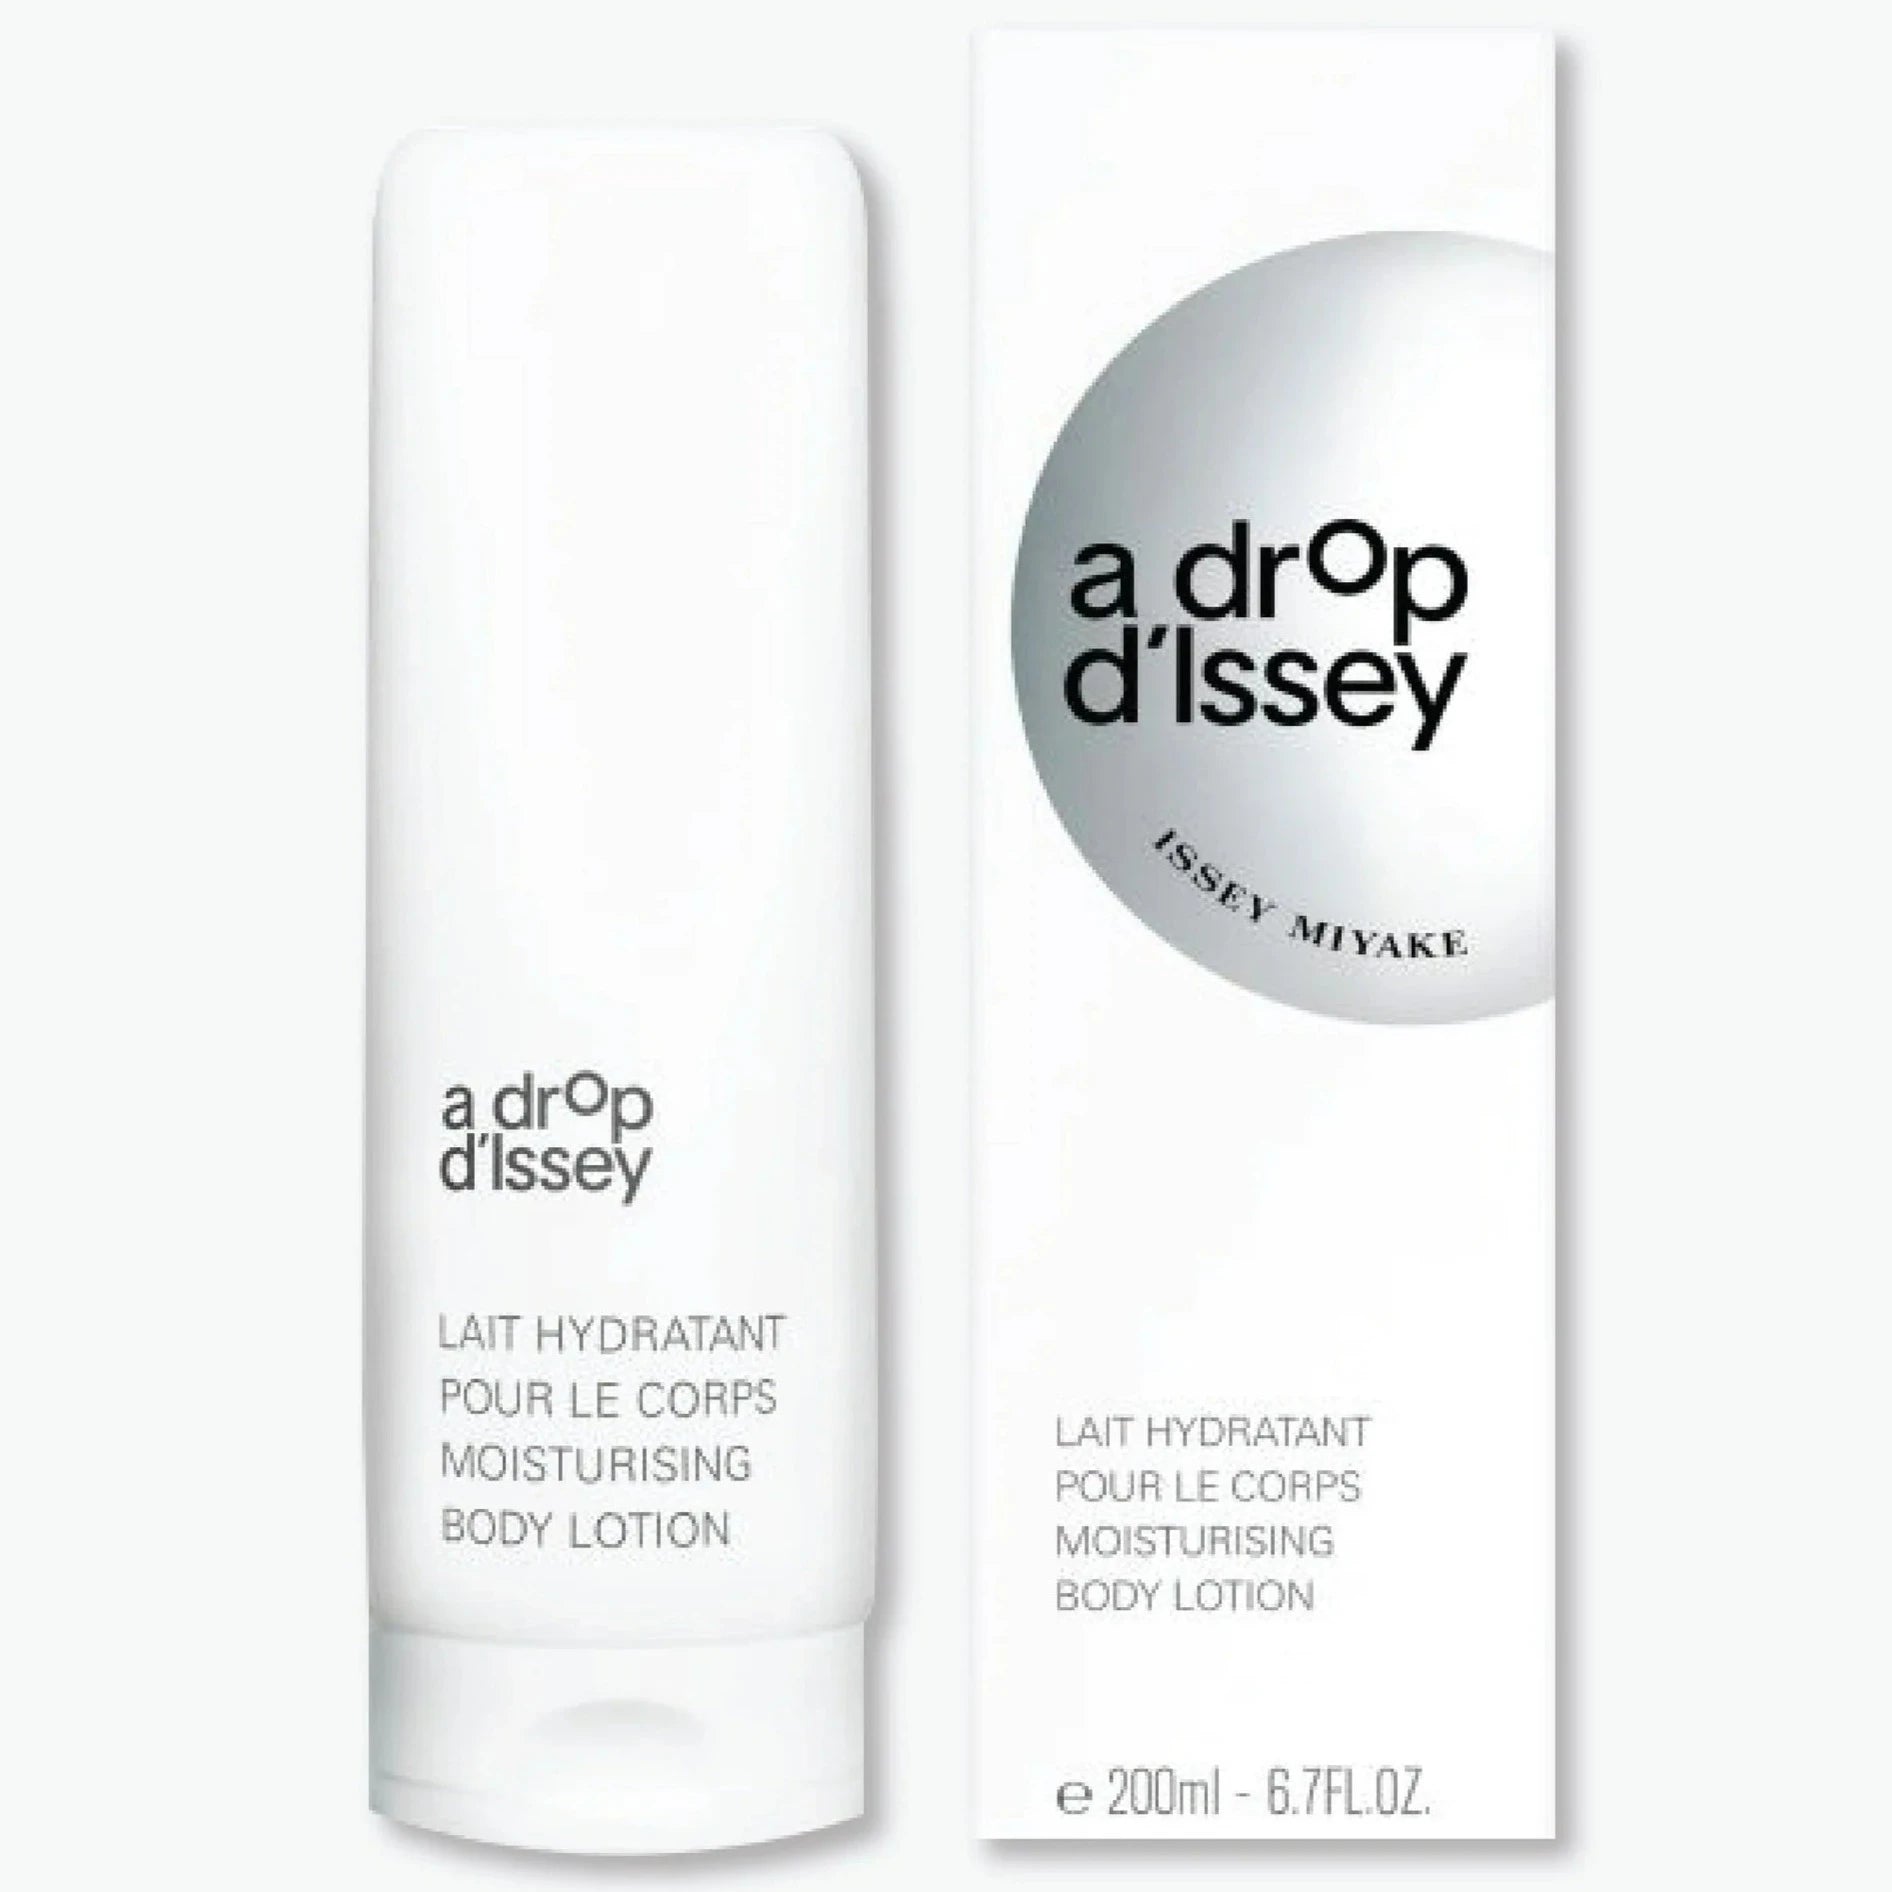 Issey Miyake A Drop D'Issey Body Lotion | My Perfume Shop Australia